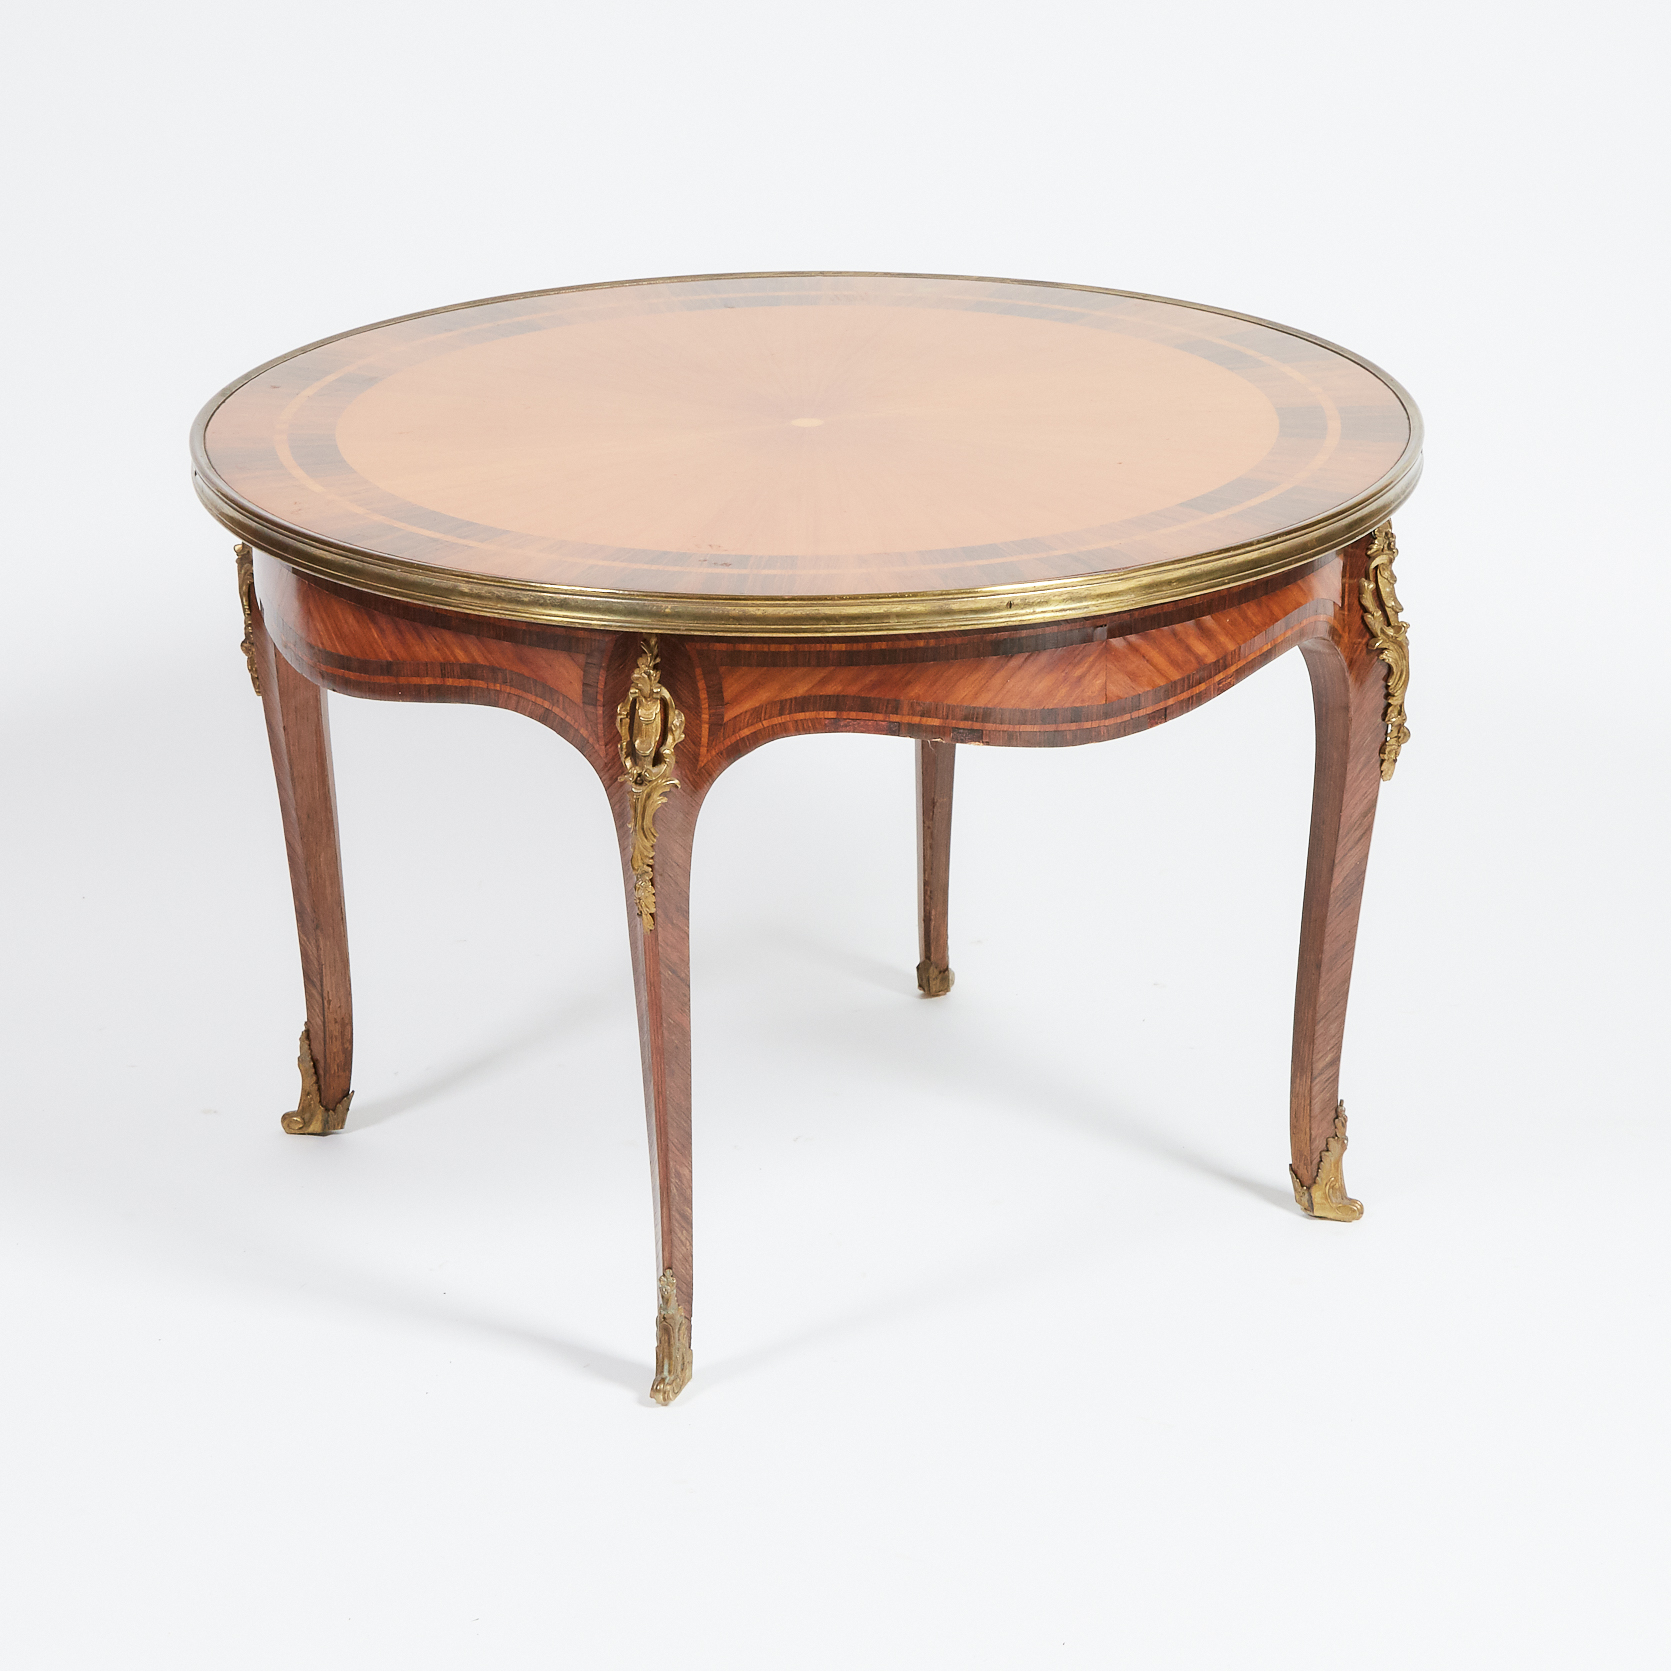 Louis XV Style Ormolu Mounted King and Tulip Wood Coffee Table, mid 20th century